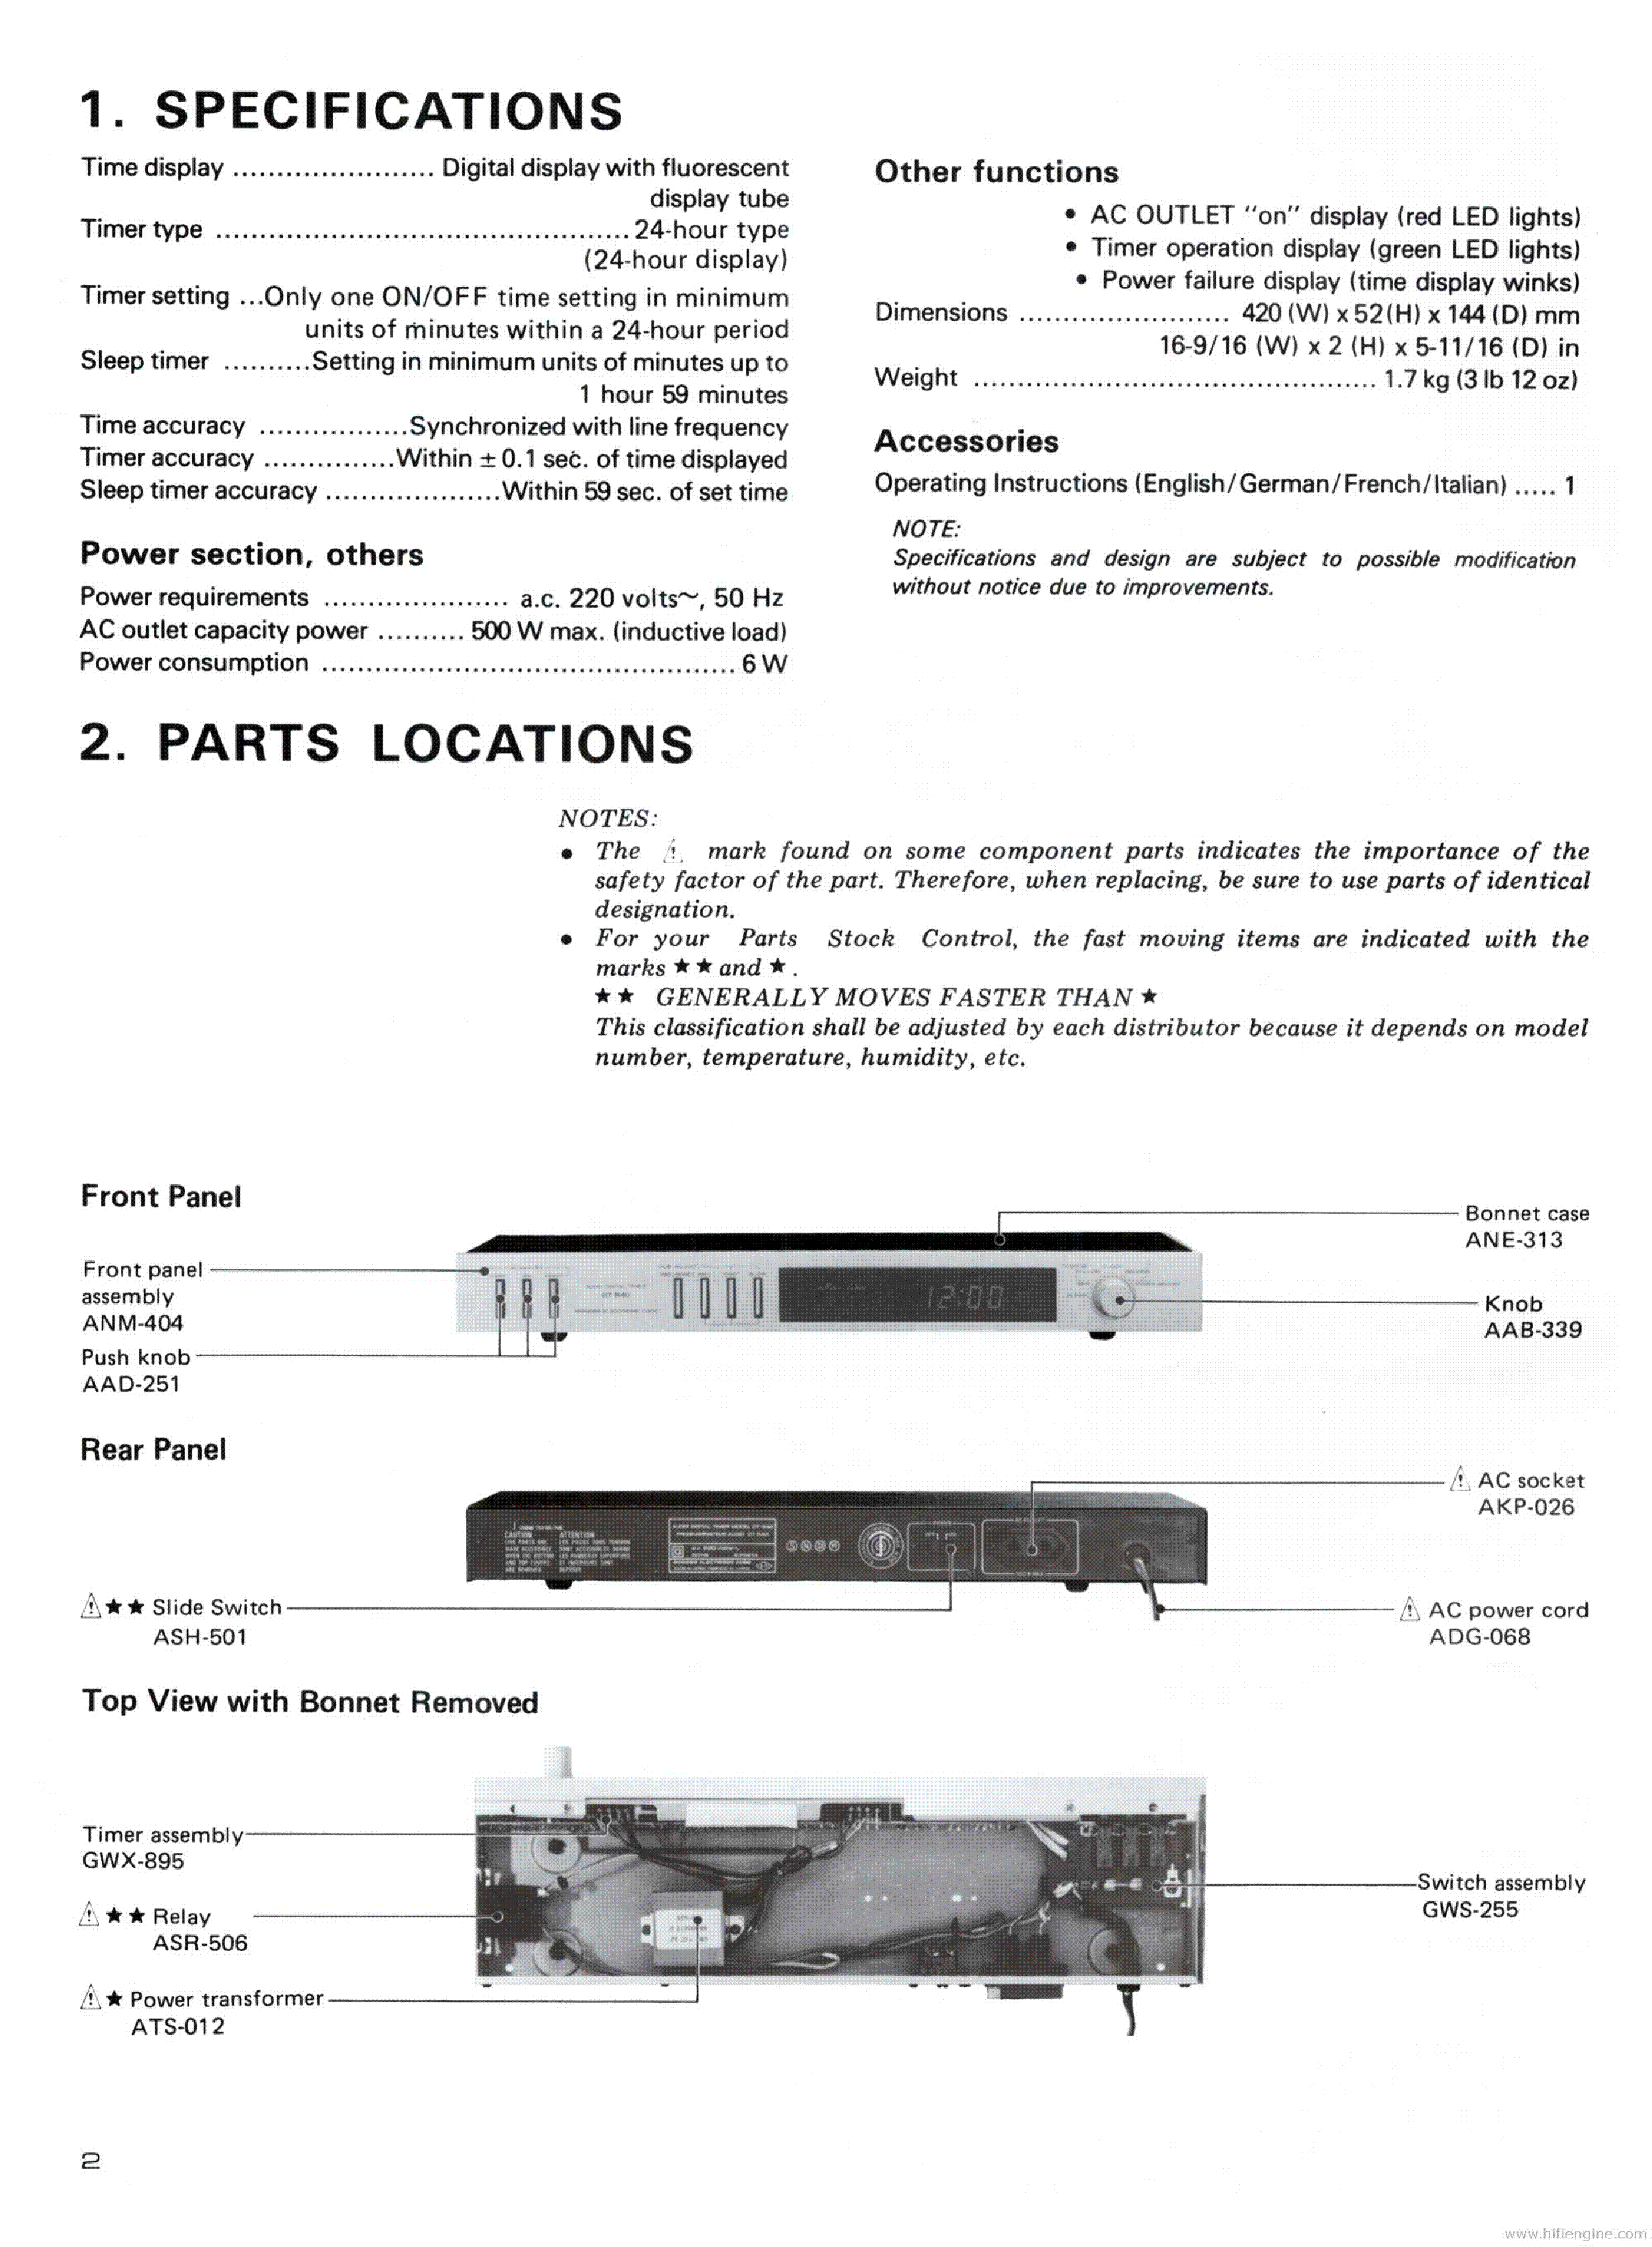 PIONEER DT-540 ARP3330 service manual (2nd page)